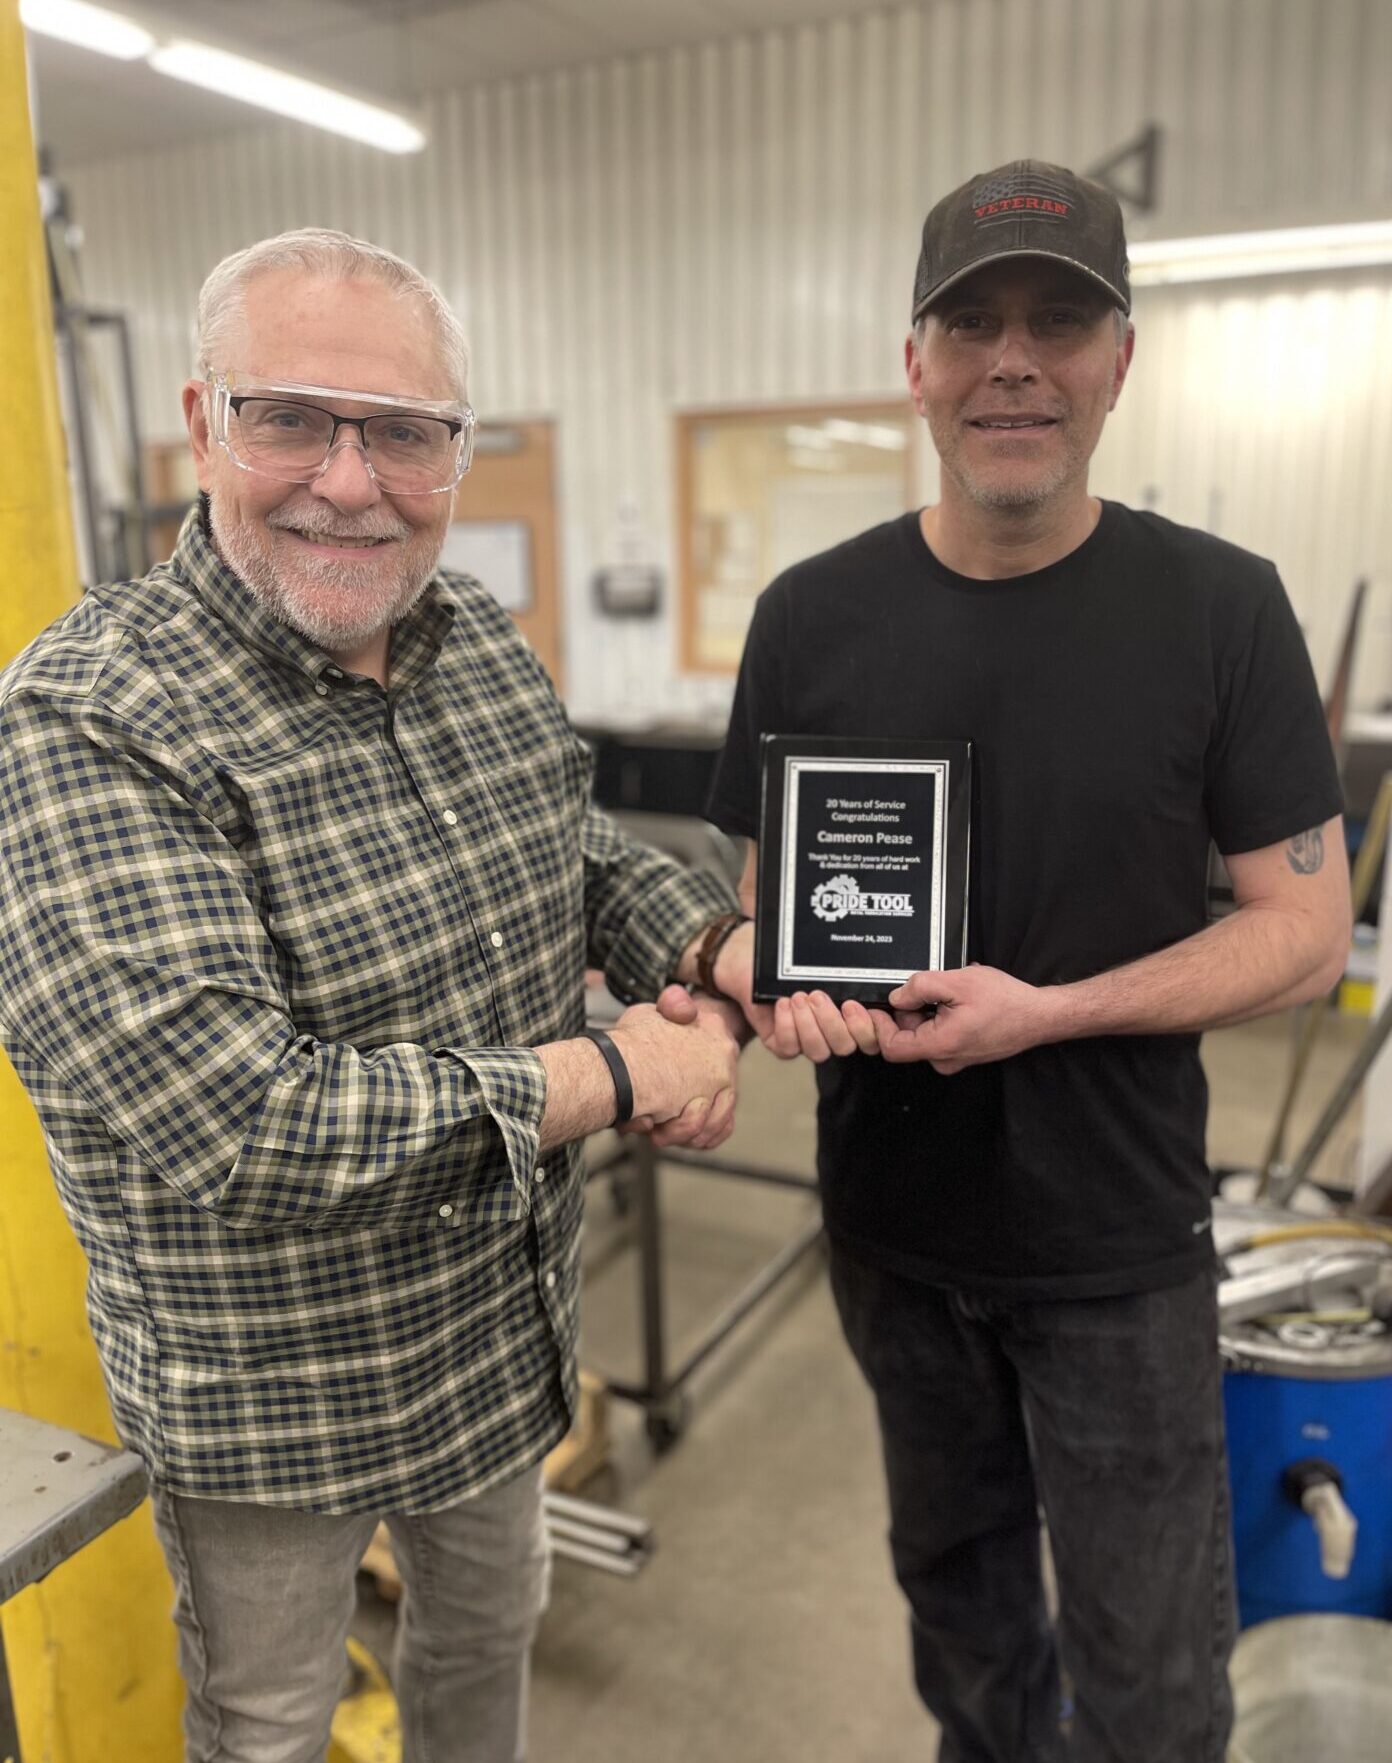 Employee longevity and dedication as exemplified by Cameron Pease, a 20 year experience CNC lathe operator at Pride Tool